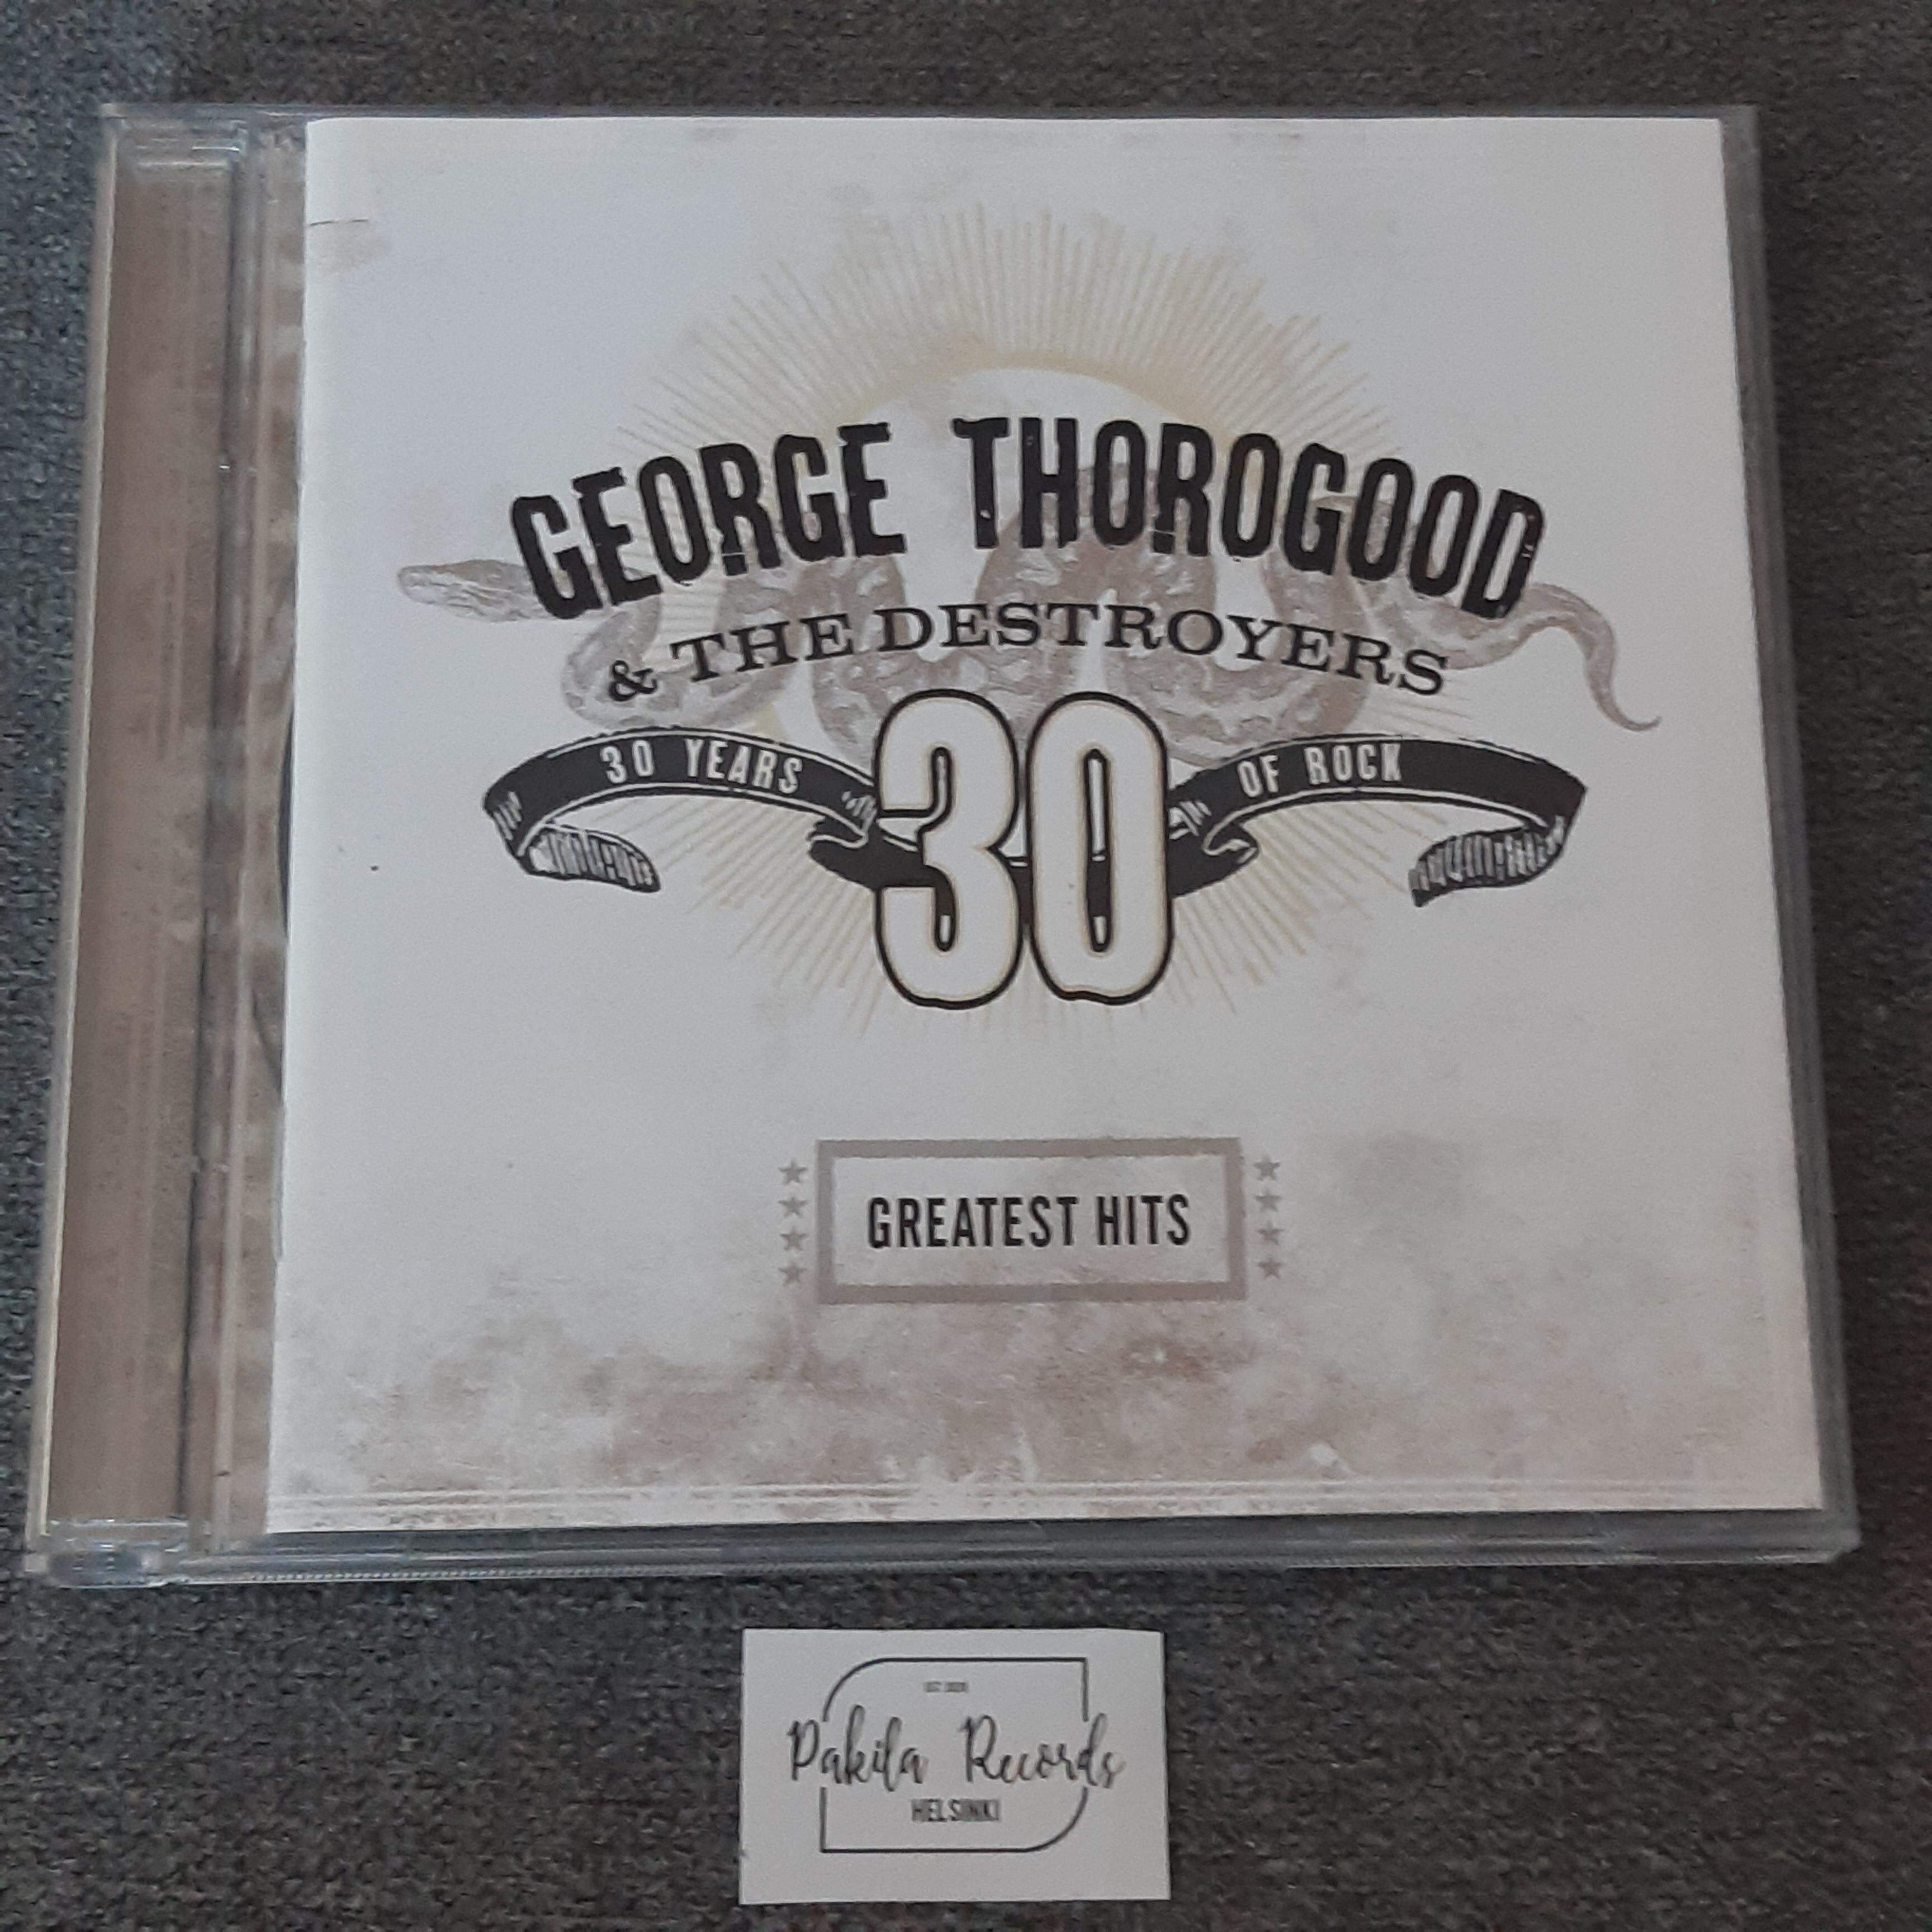 George Thorogood & The Destroyers - Greatest Hits: 30 Years Of Rock - CD (käytetty)